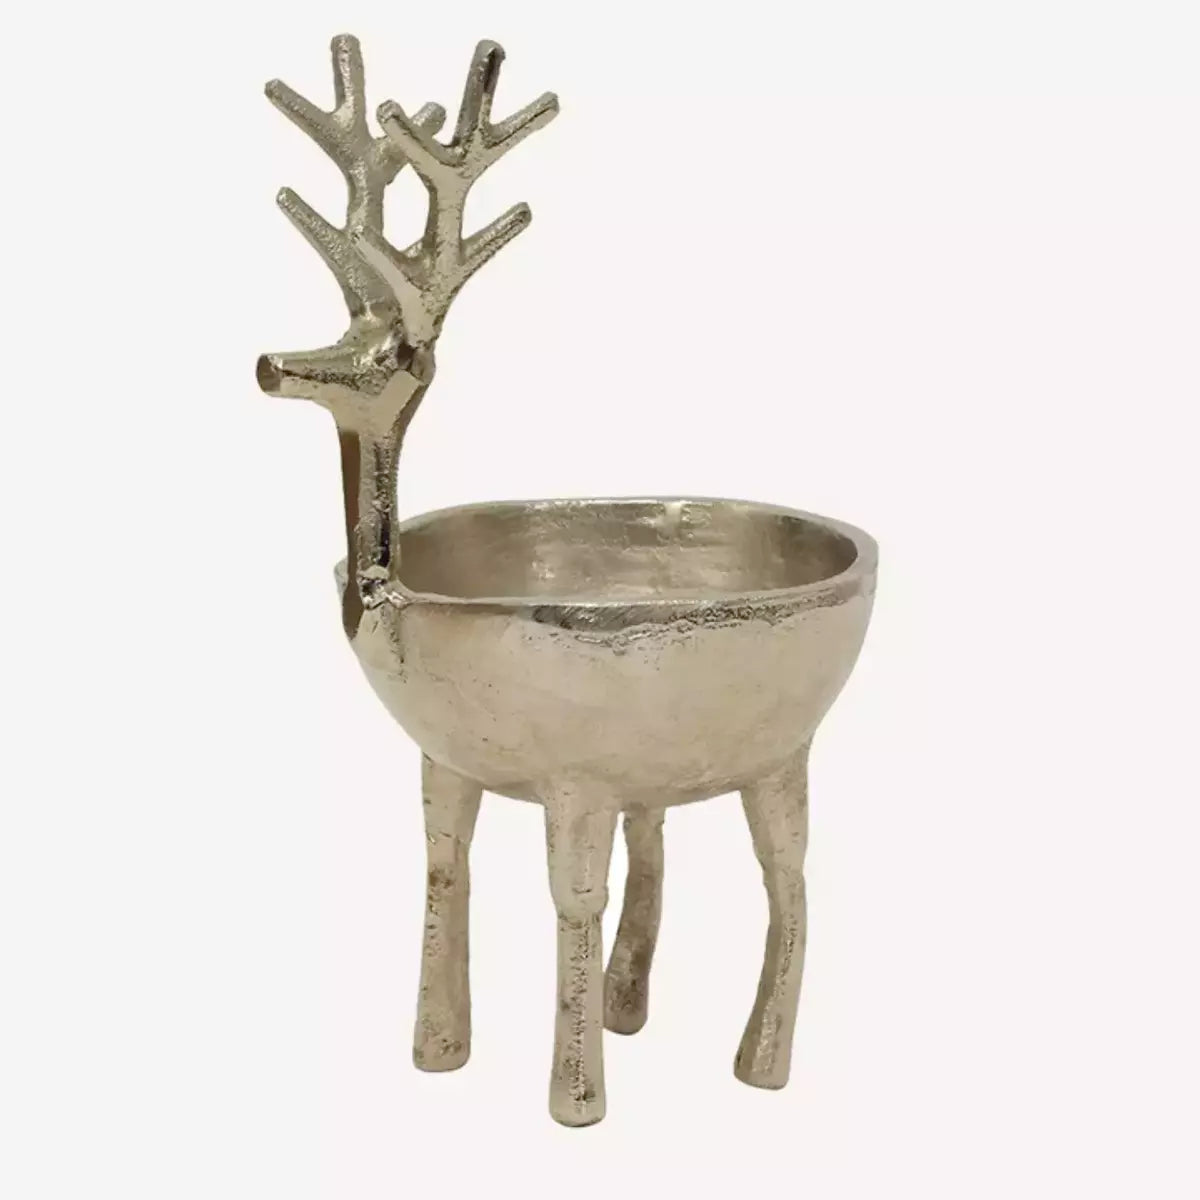 A French Country Collections Reindeer Sweets Bowl - Silver - Large.